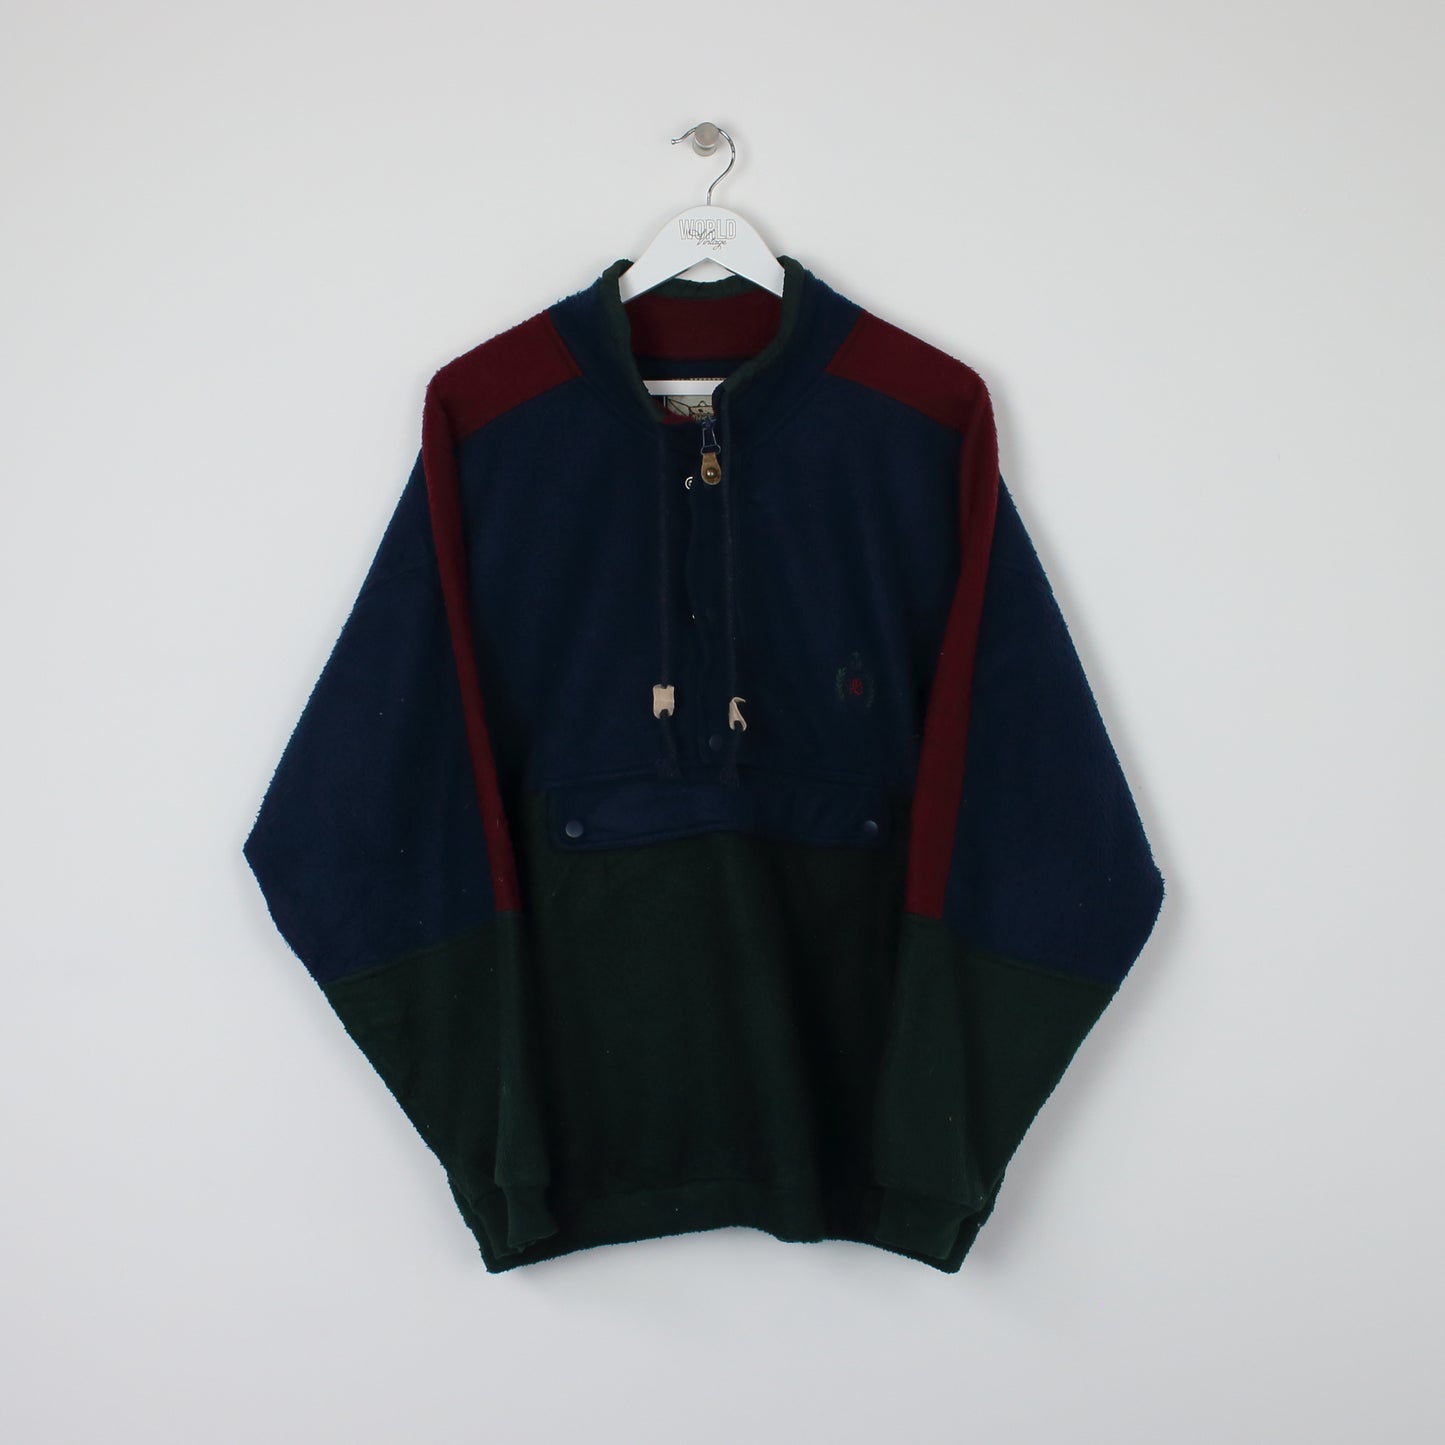 Vintage Bugle Boy Company fleece in green and blue. Best fits XL